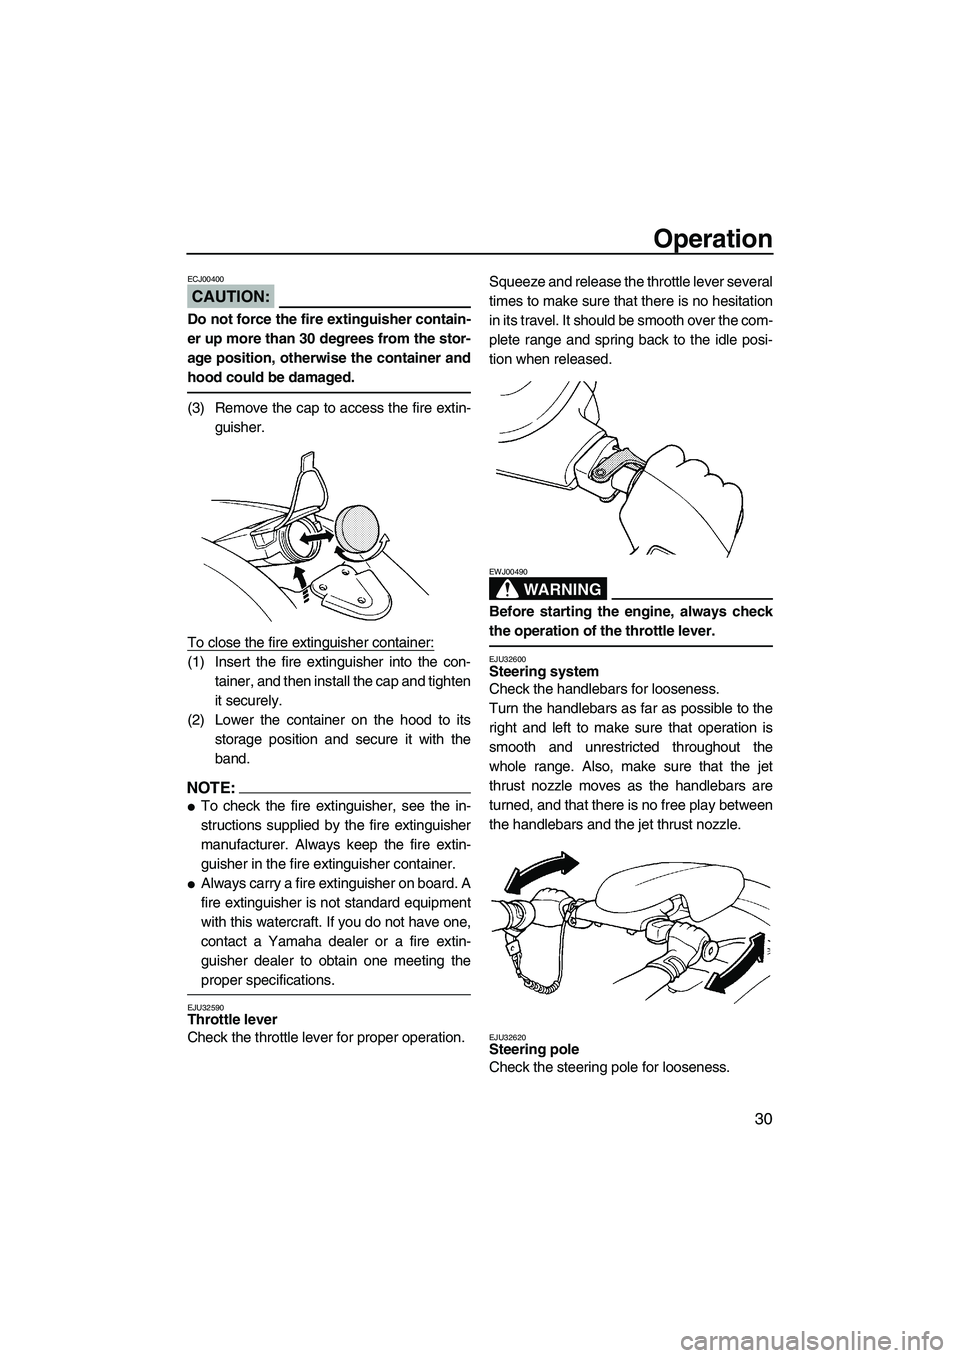 YAMAHA SUPERJET 2007  Owners Manual Operation
30
CAUTION:
ECJ00400
Do not force the fire extinguisher contain-
er up more than 30 degrees from the stor-
age position, otherwise the container and
hood could be damaged.
(3) Remove the cap